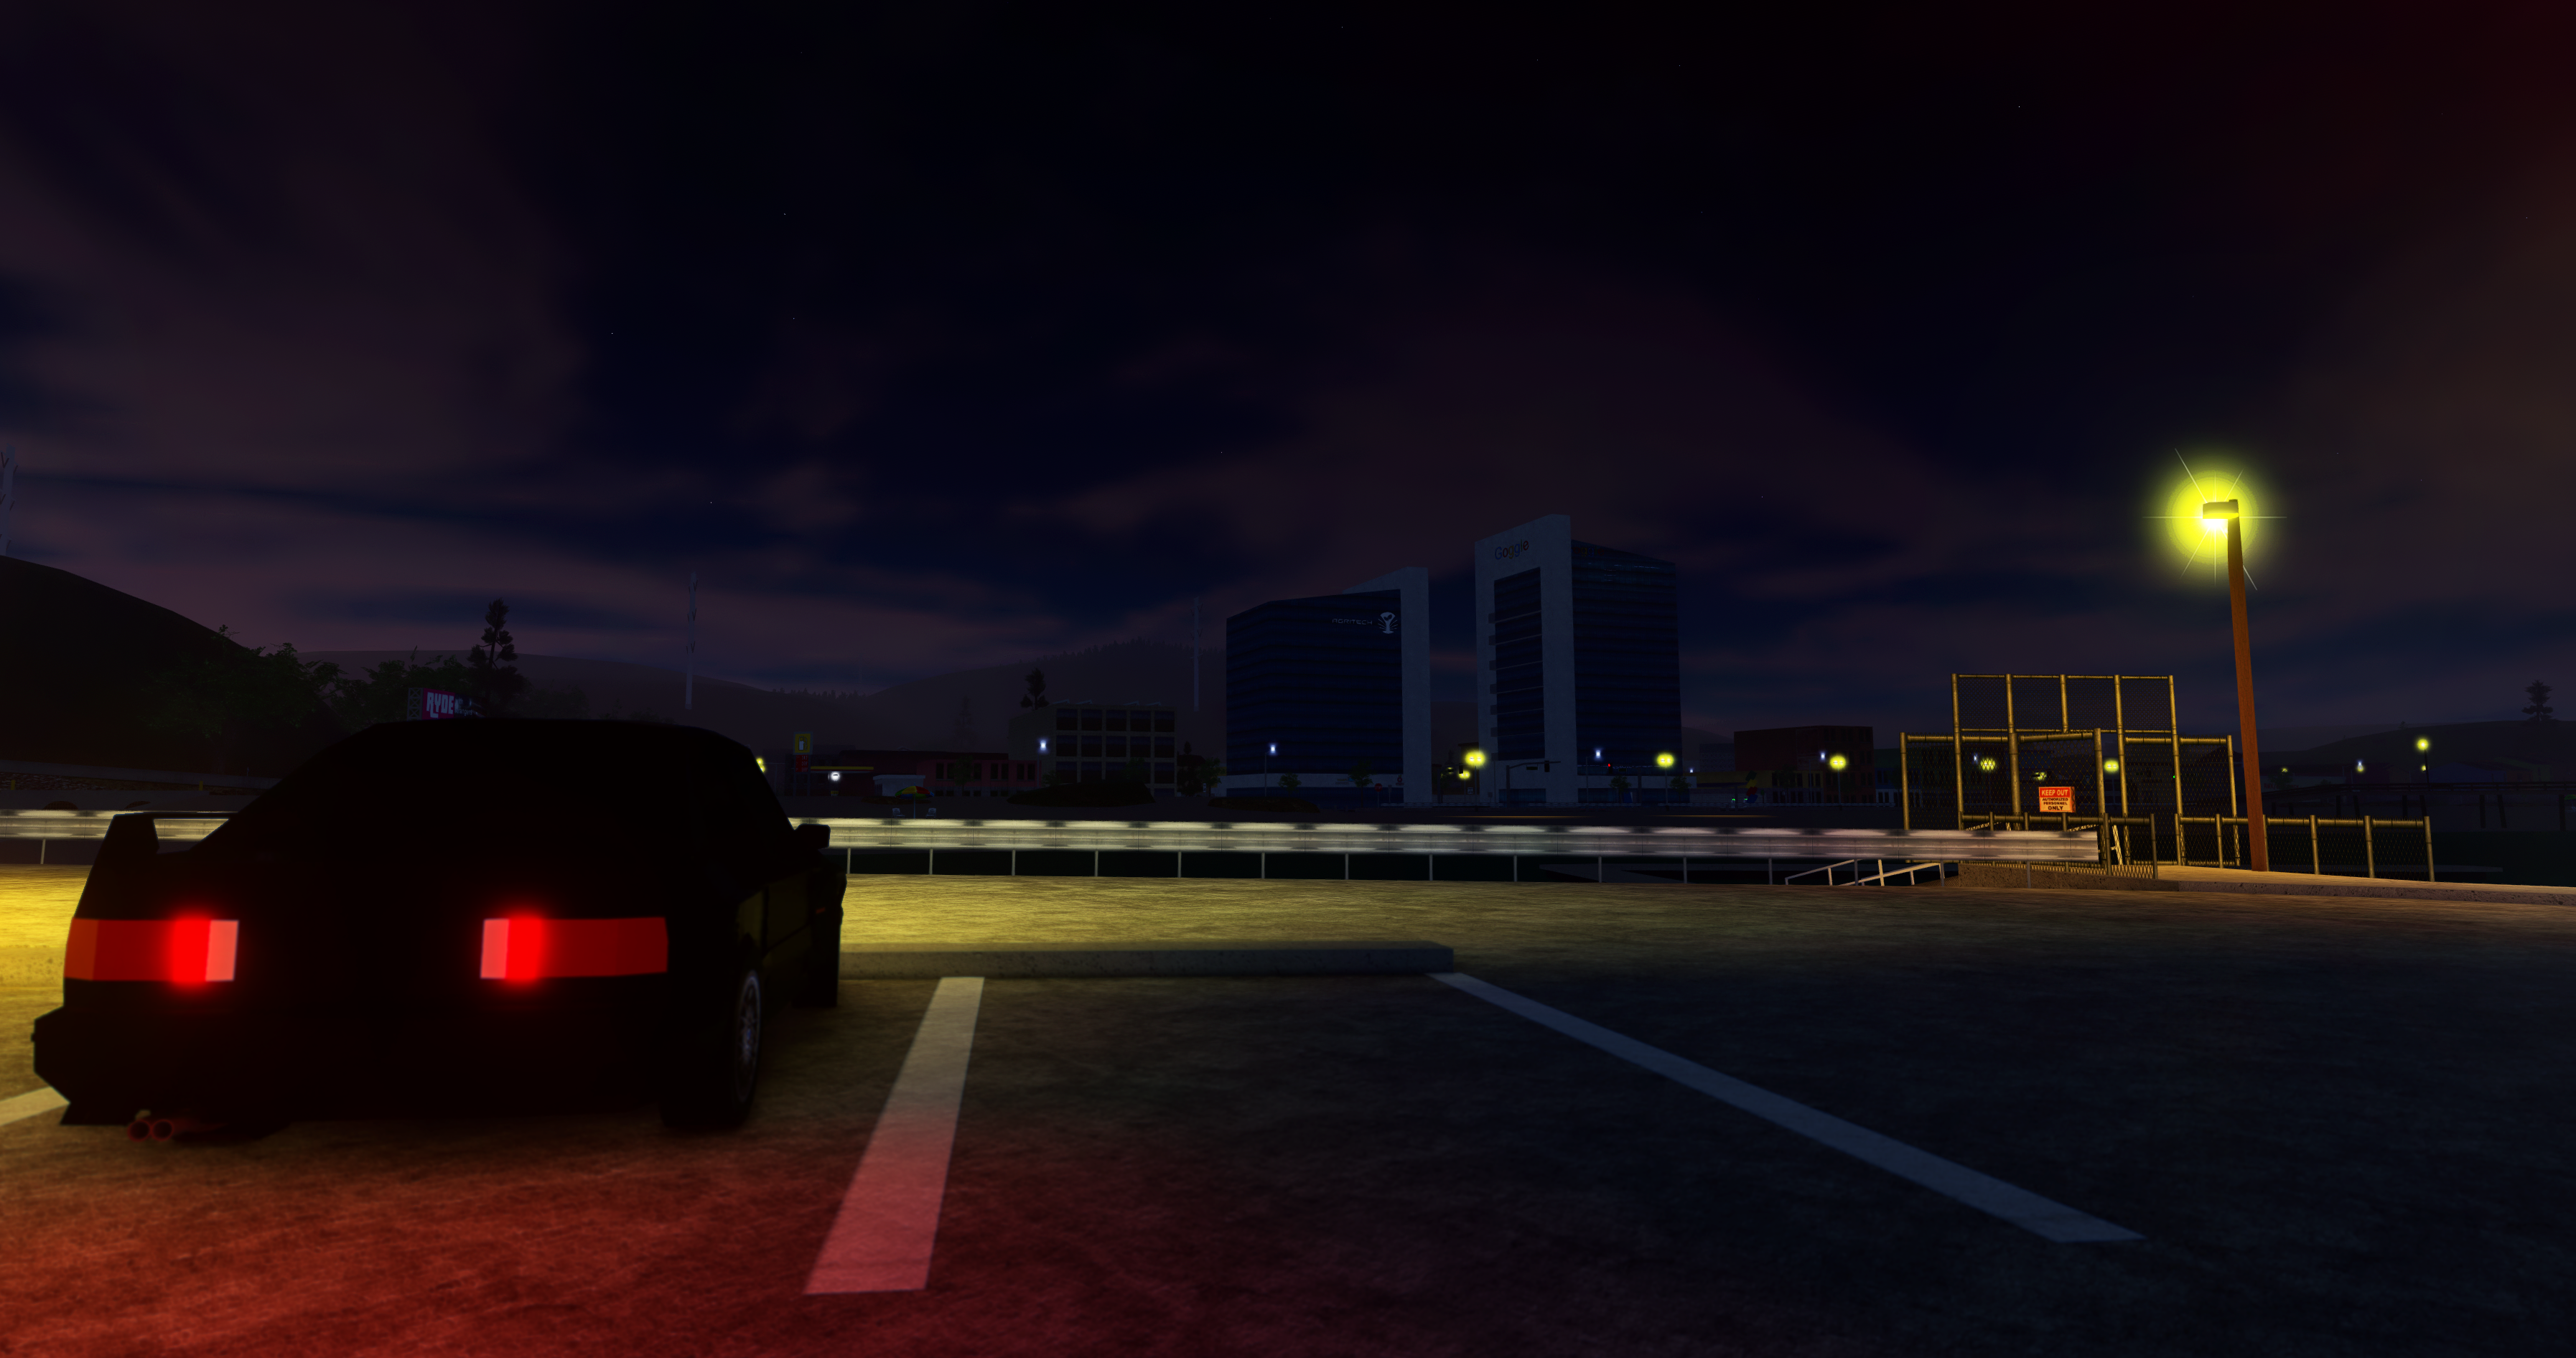 General 3588x1892 BMW E30 parking lot building Google overcast Pacifico (Roblox Game) BMW German cars video games